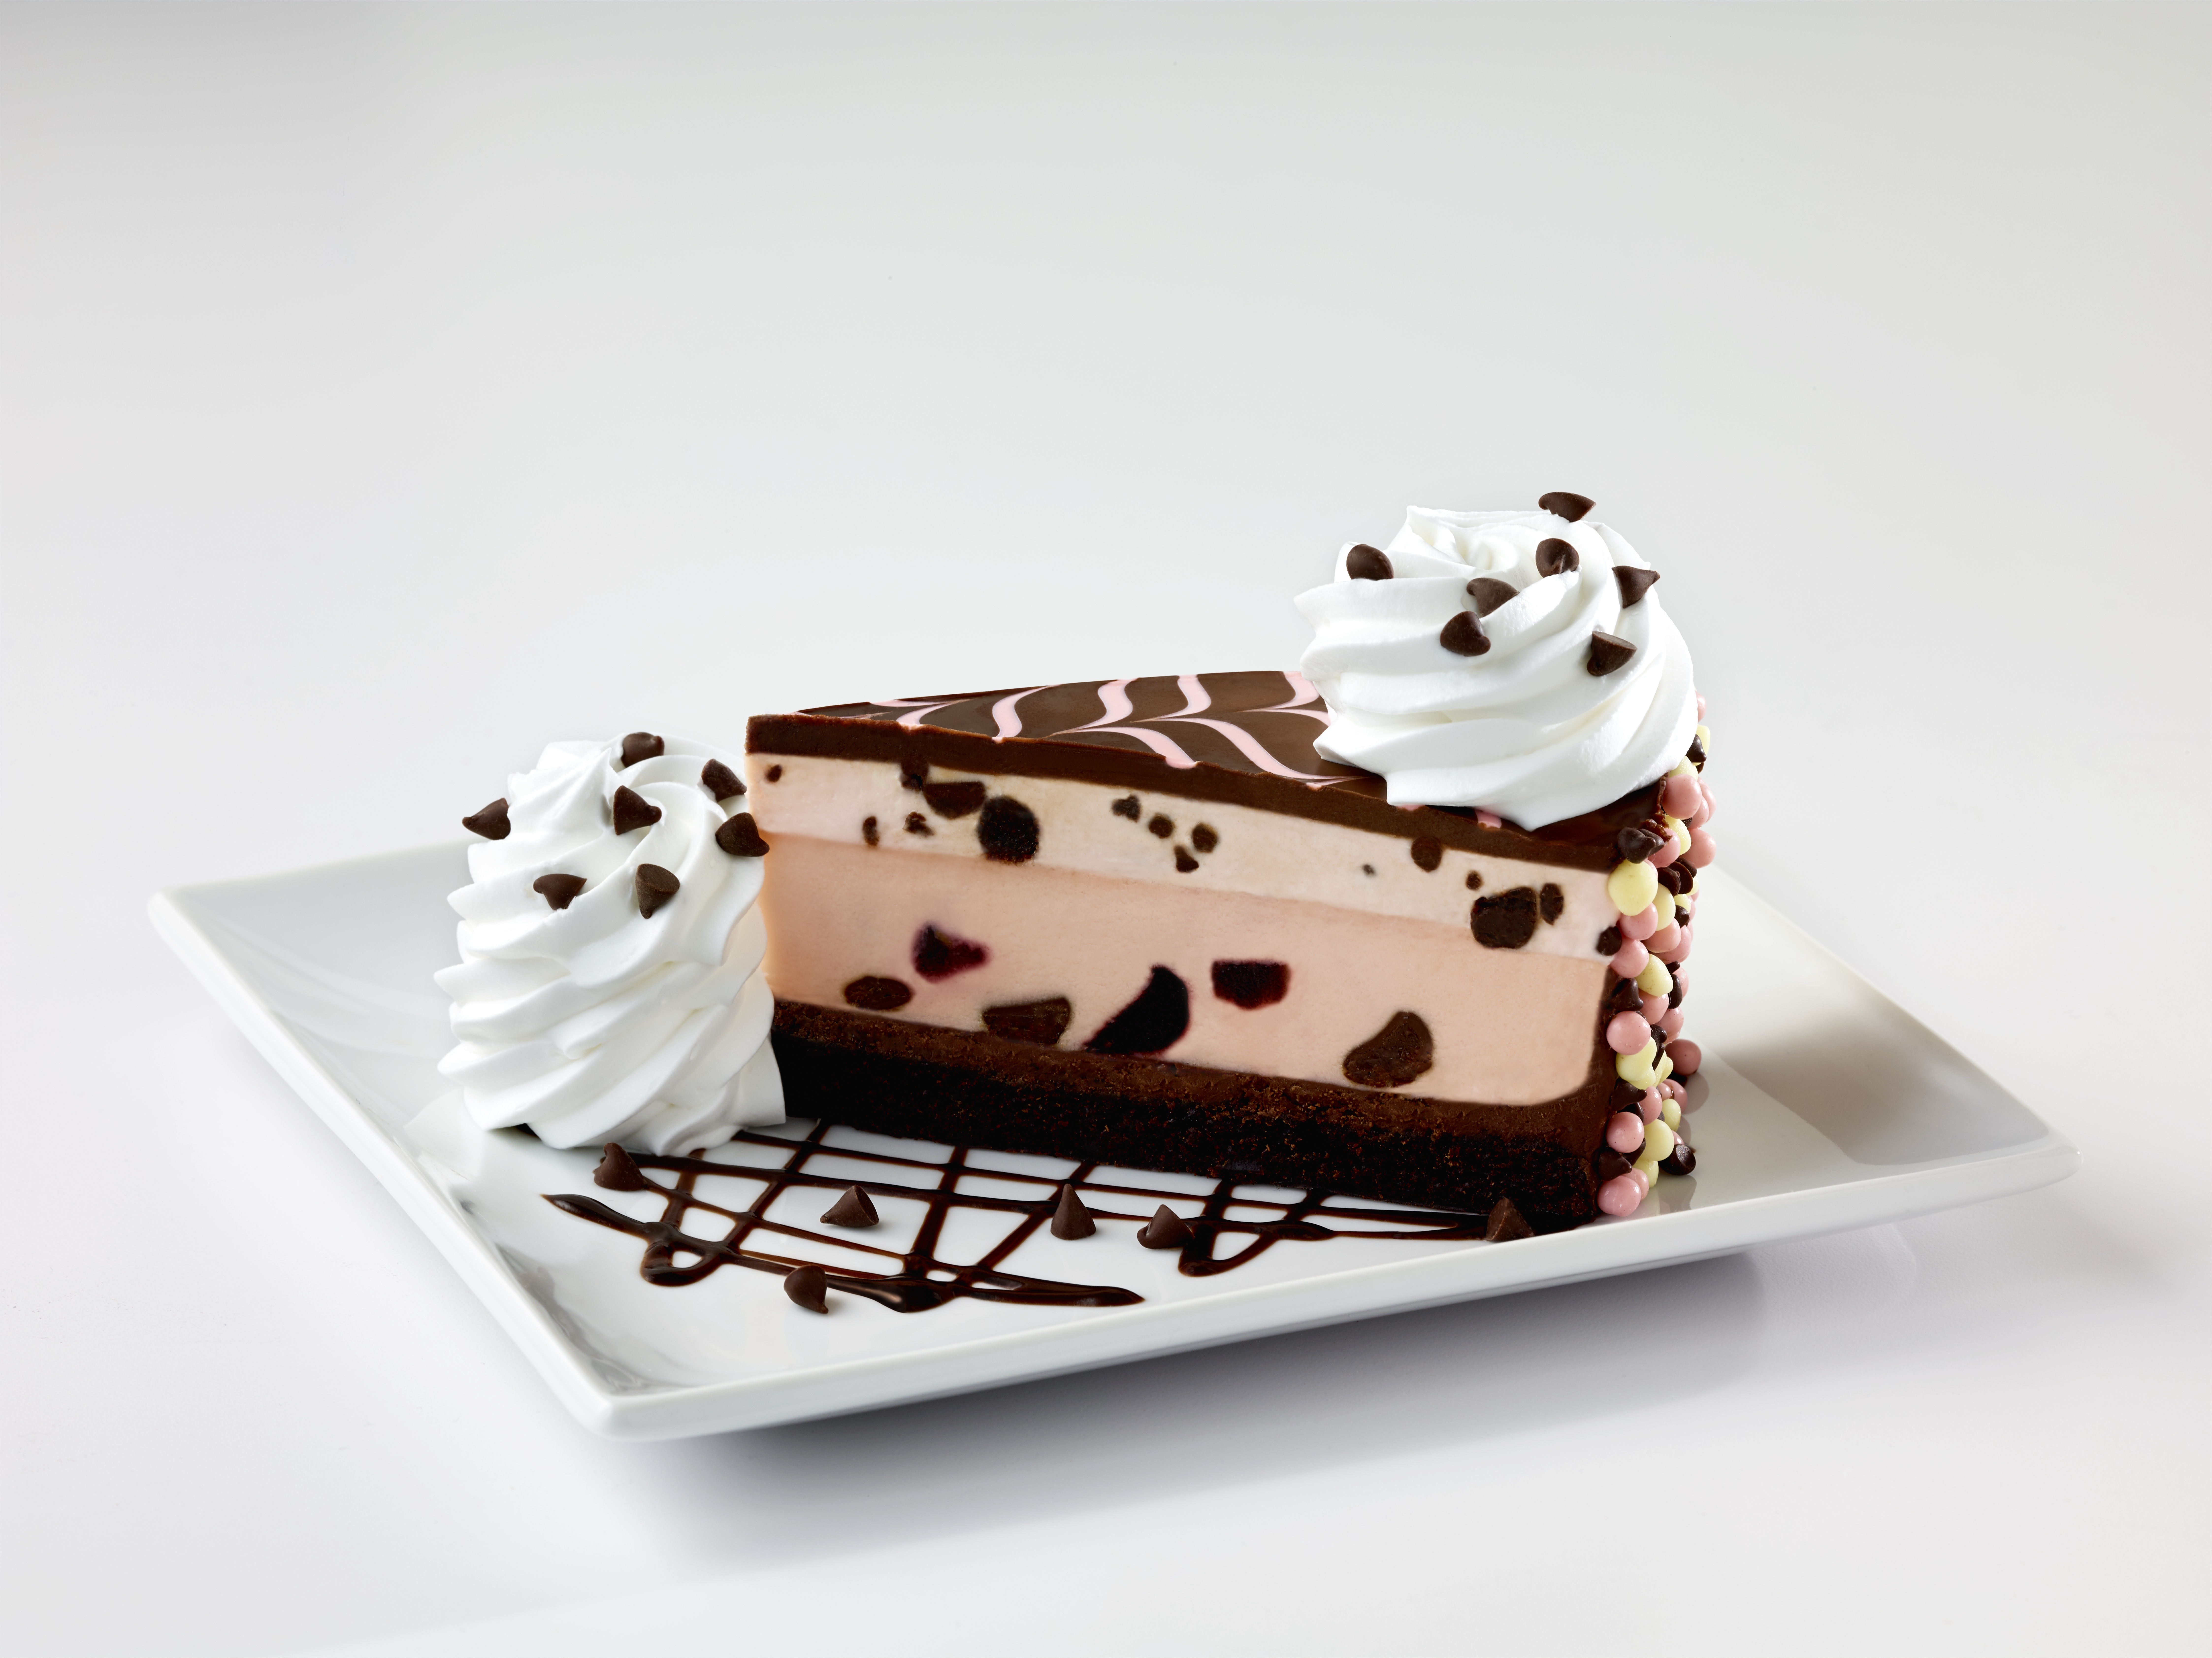 The Cheesecake Factory Celebrates National Cheesecake Day with Any